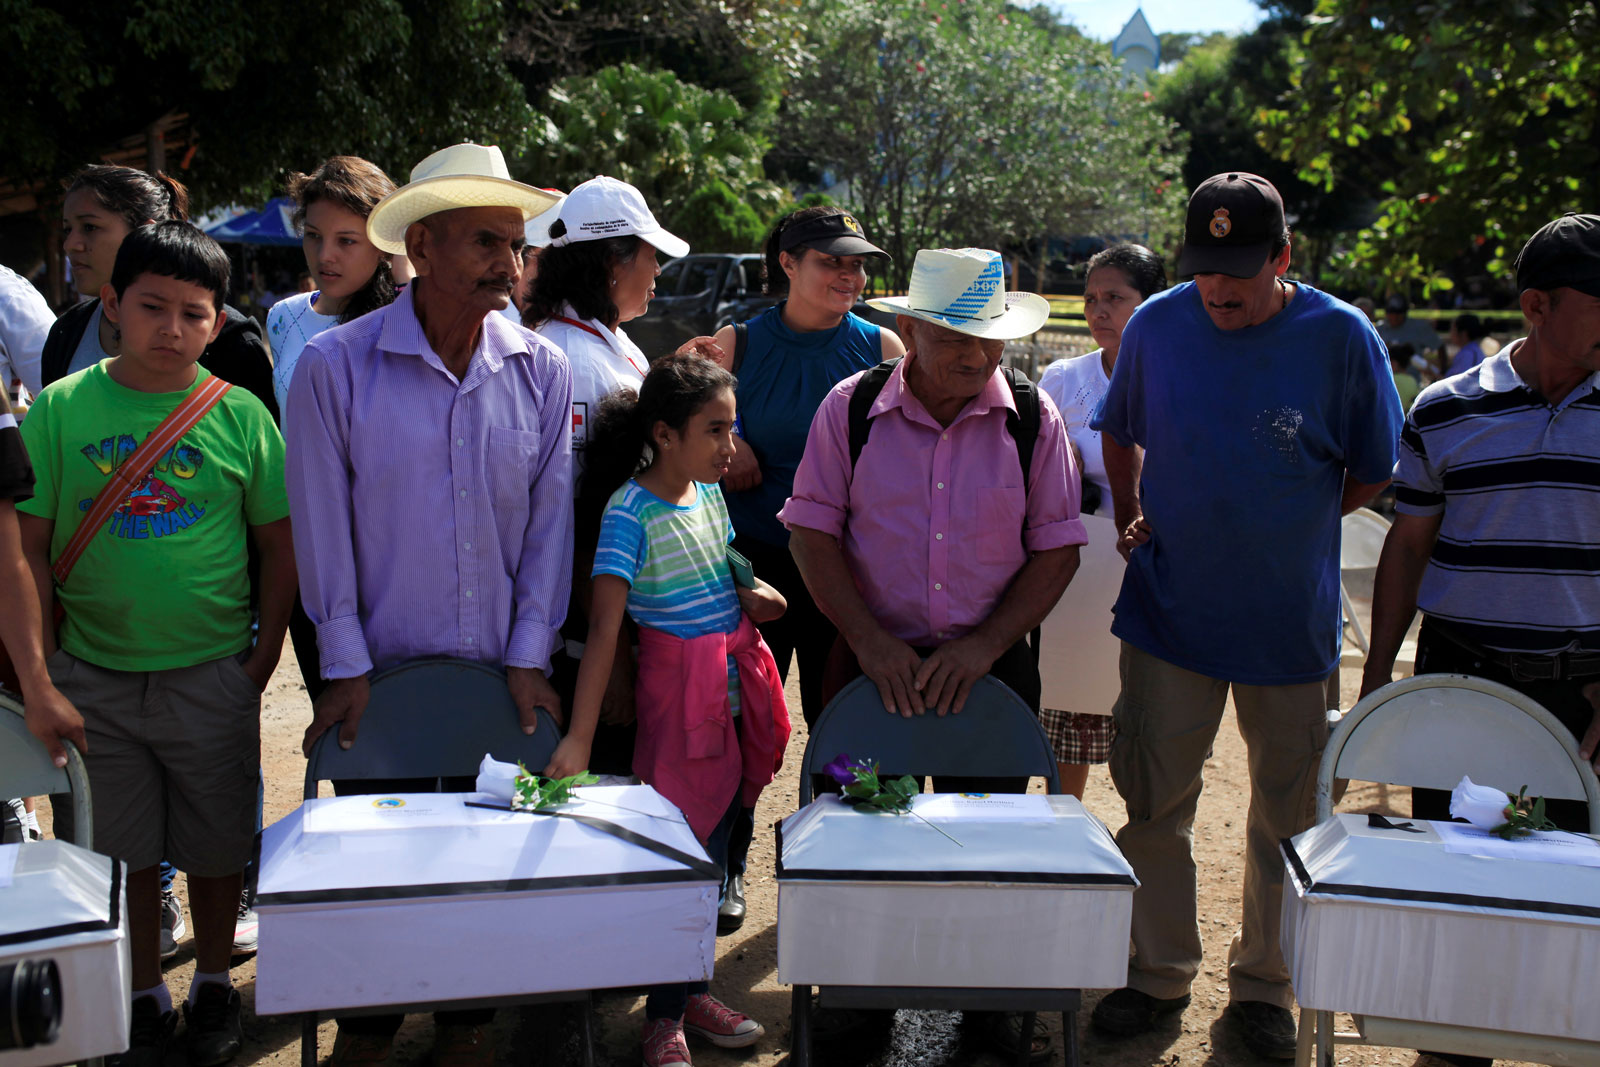 Families of those killed at the El Mozote massacre, with the unearthed remains of the victims, El Mozote, El Salvador, December 10, 2016